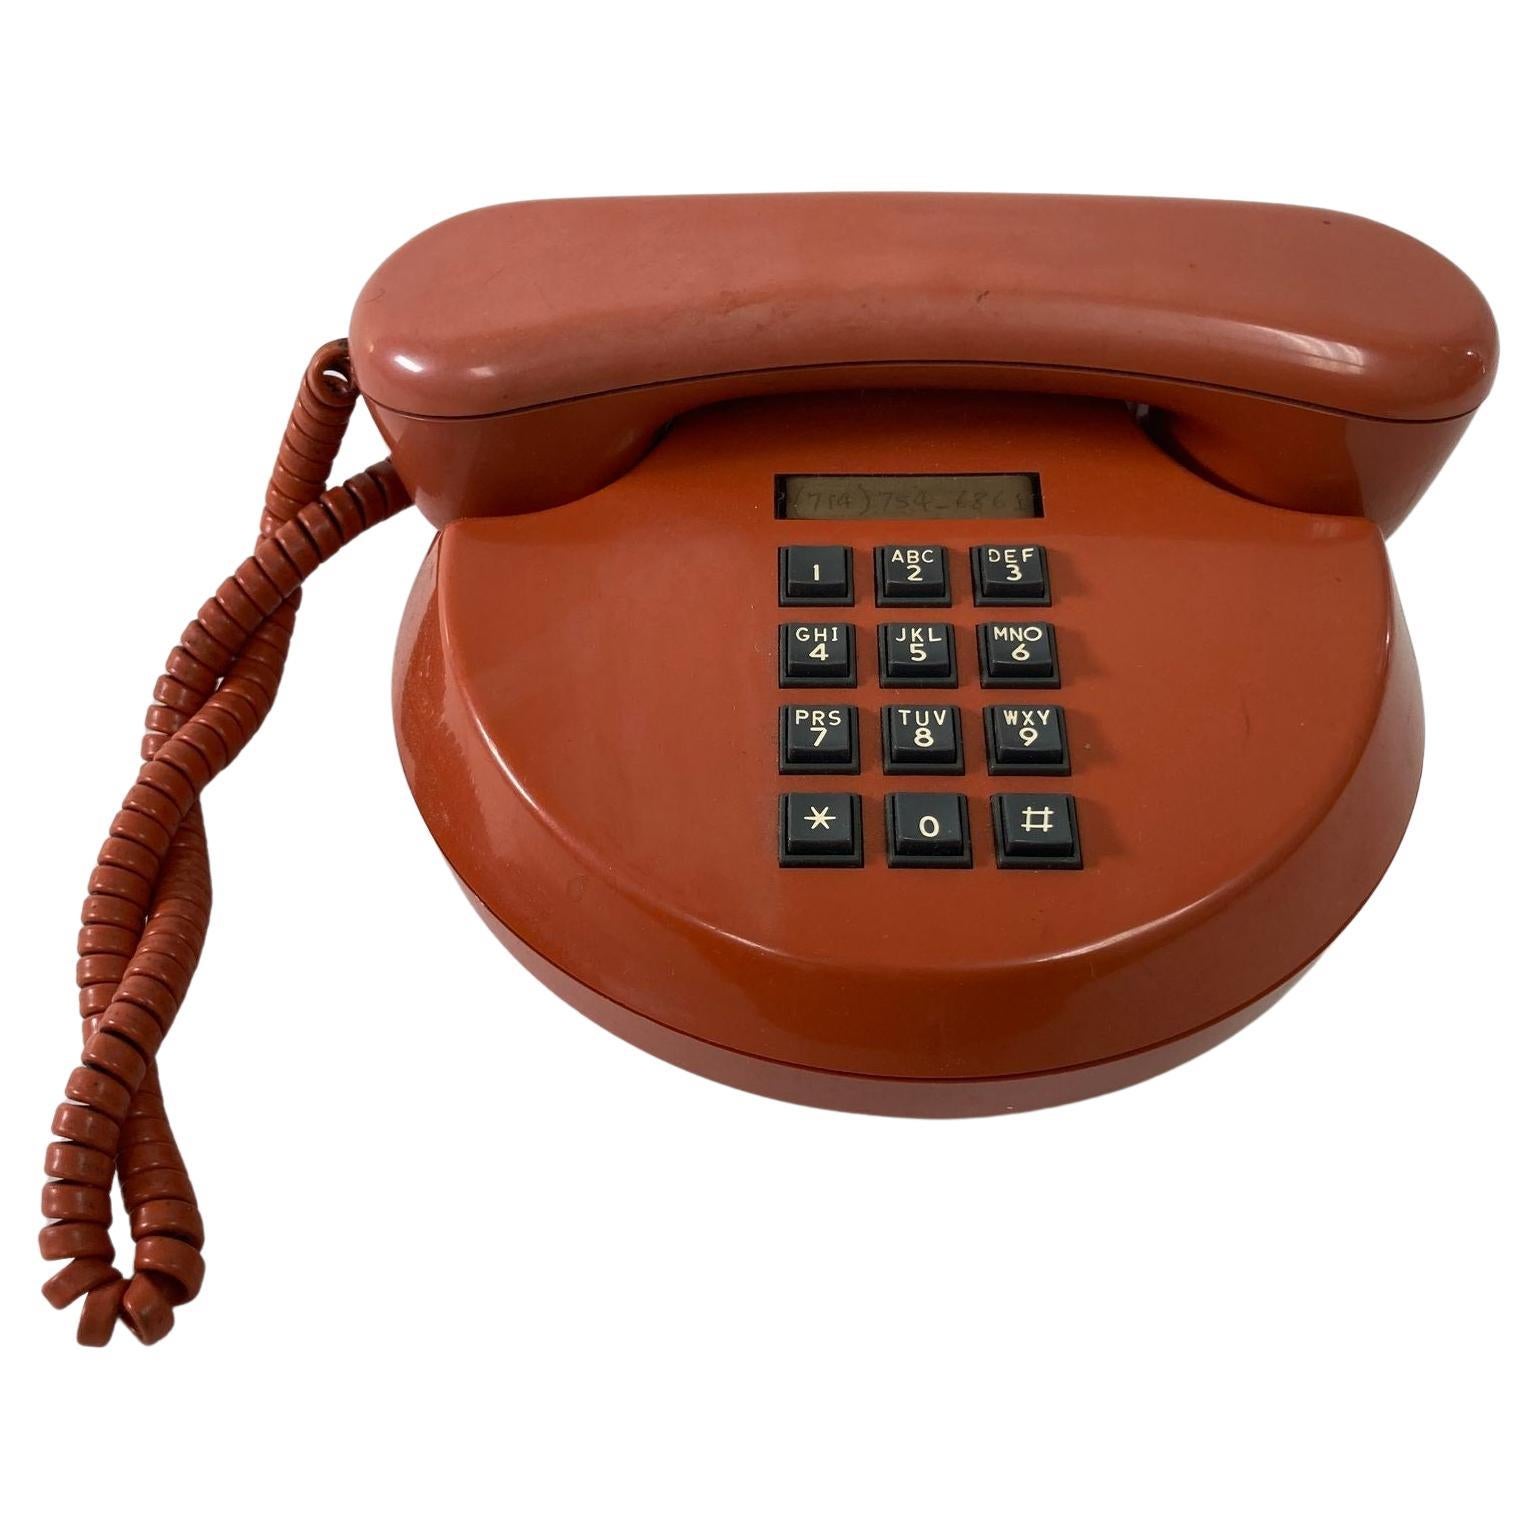 Vintage Retro Push-Button Round Telephone Burnt Orange Color from the, 70s